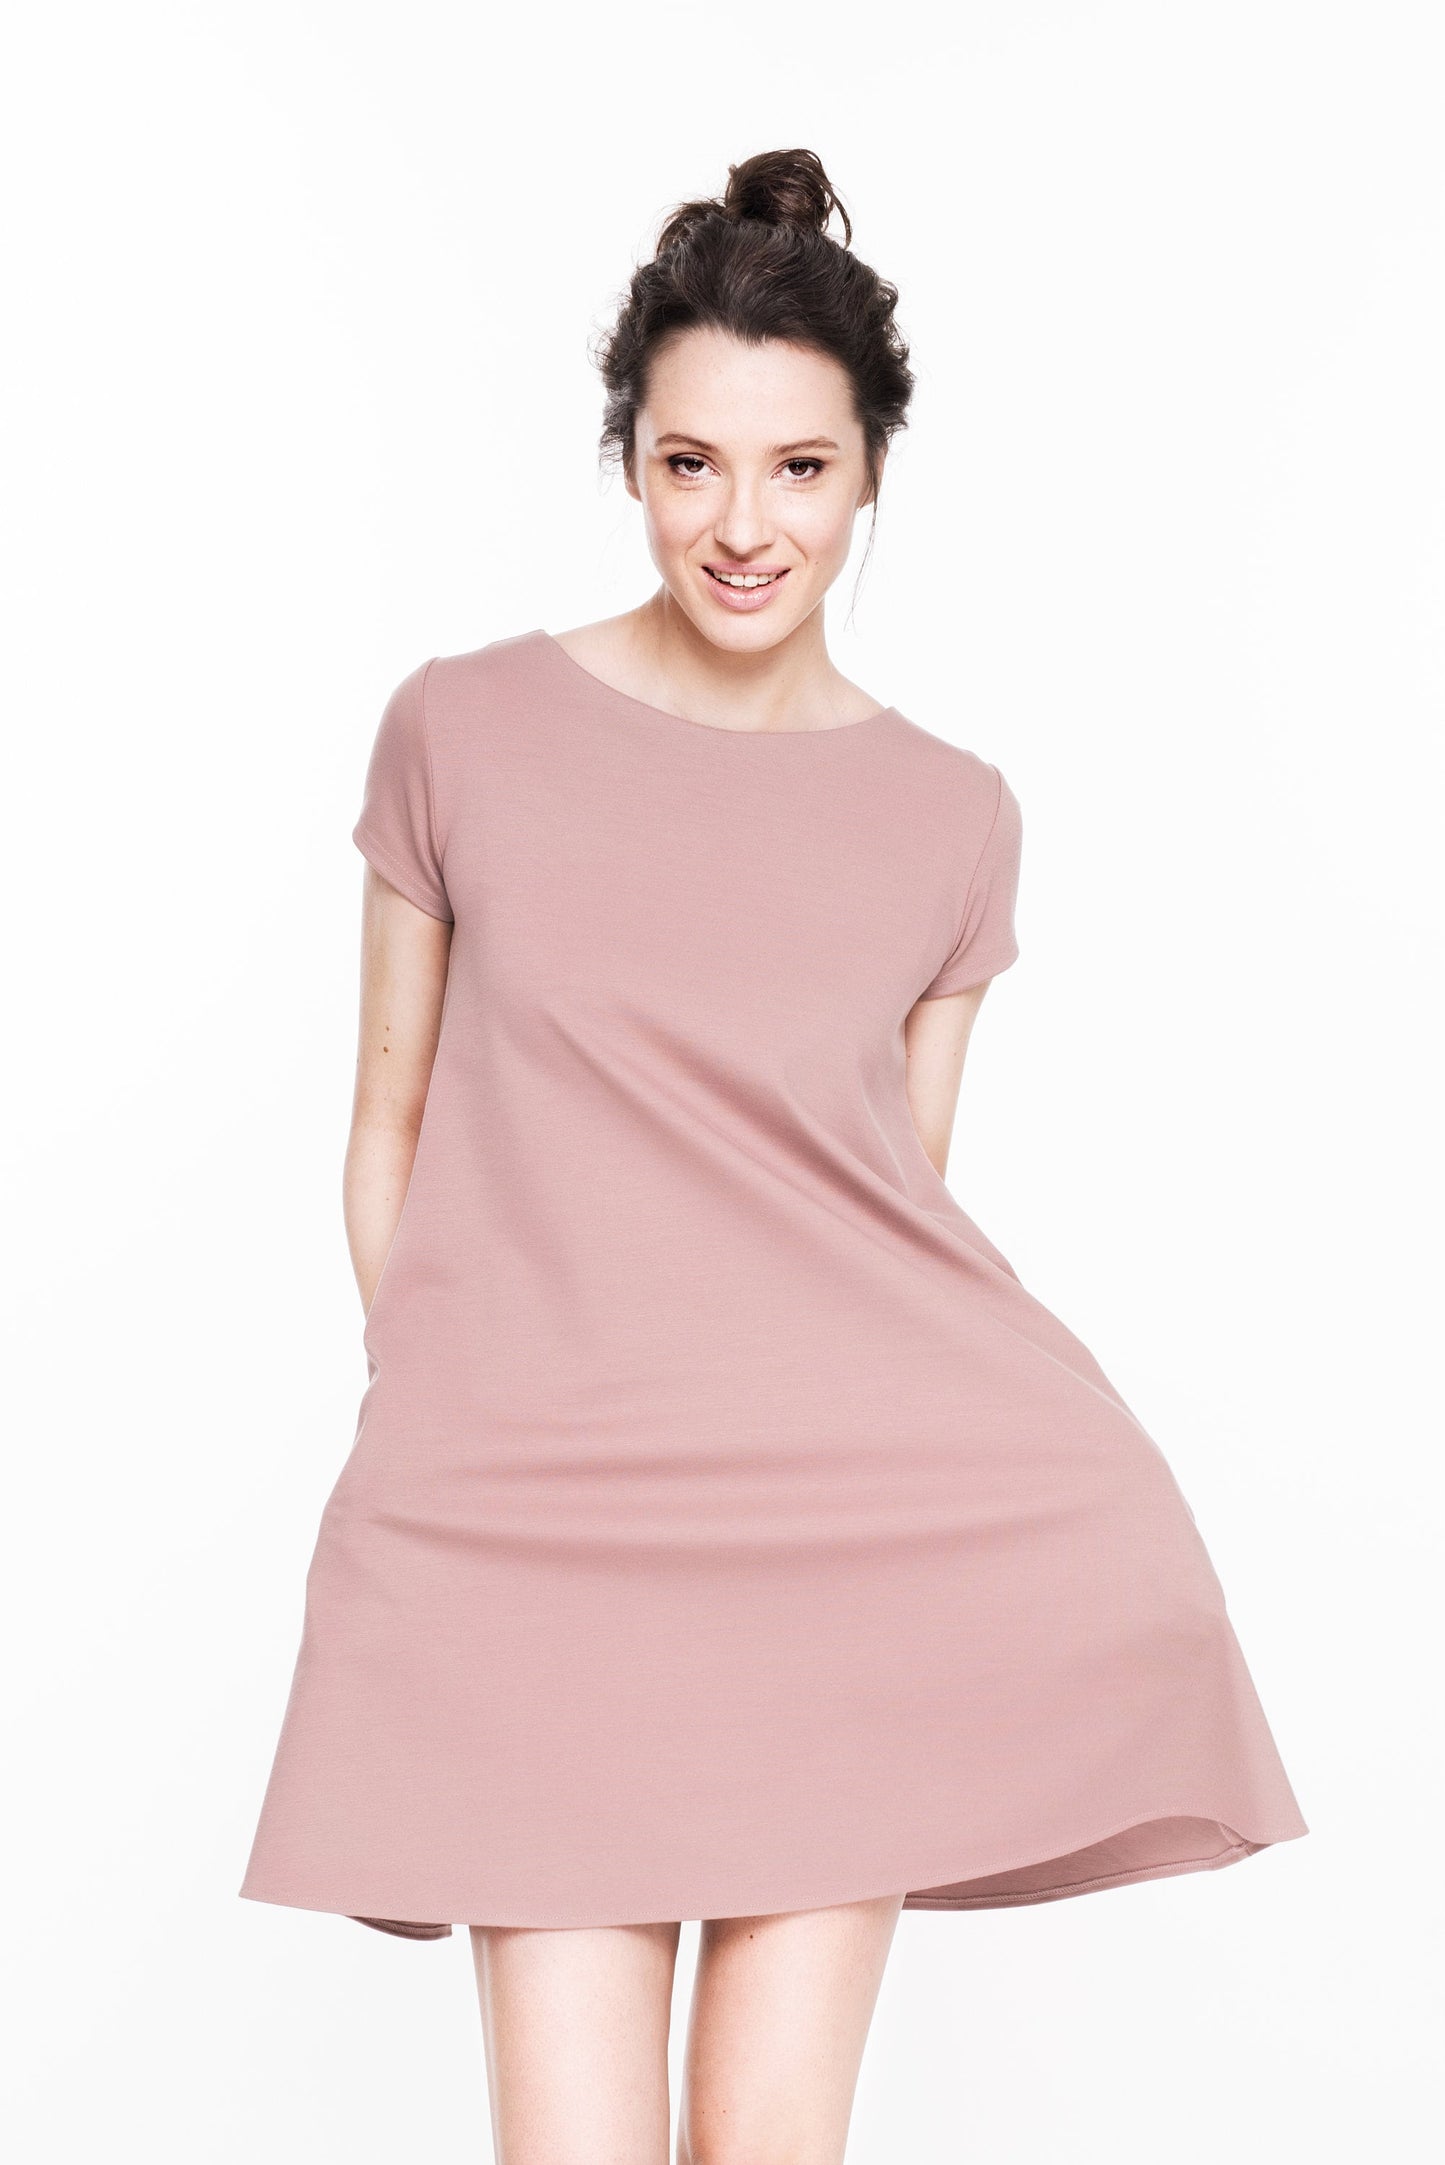 LeMuse SUMMER CALMNESS dress with buttons, Dusty rose, S